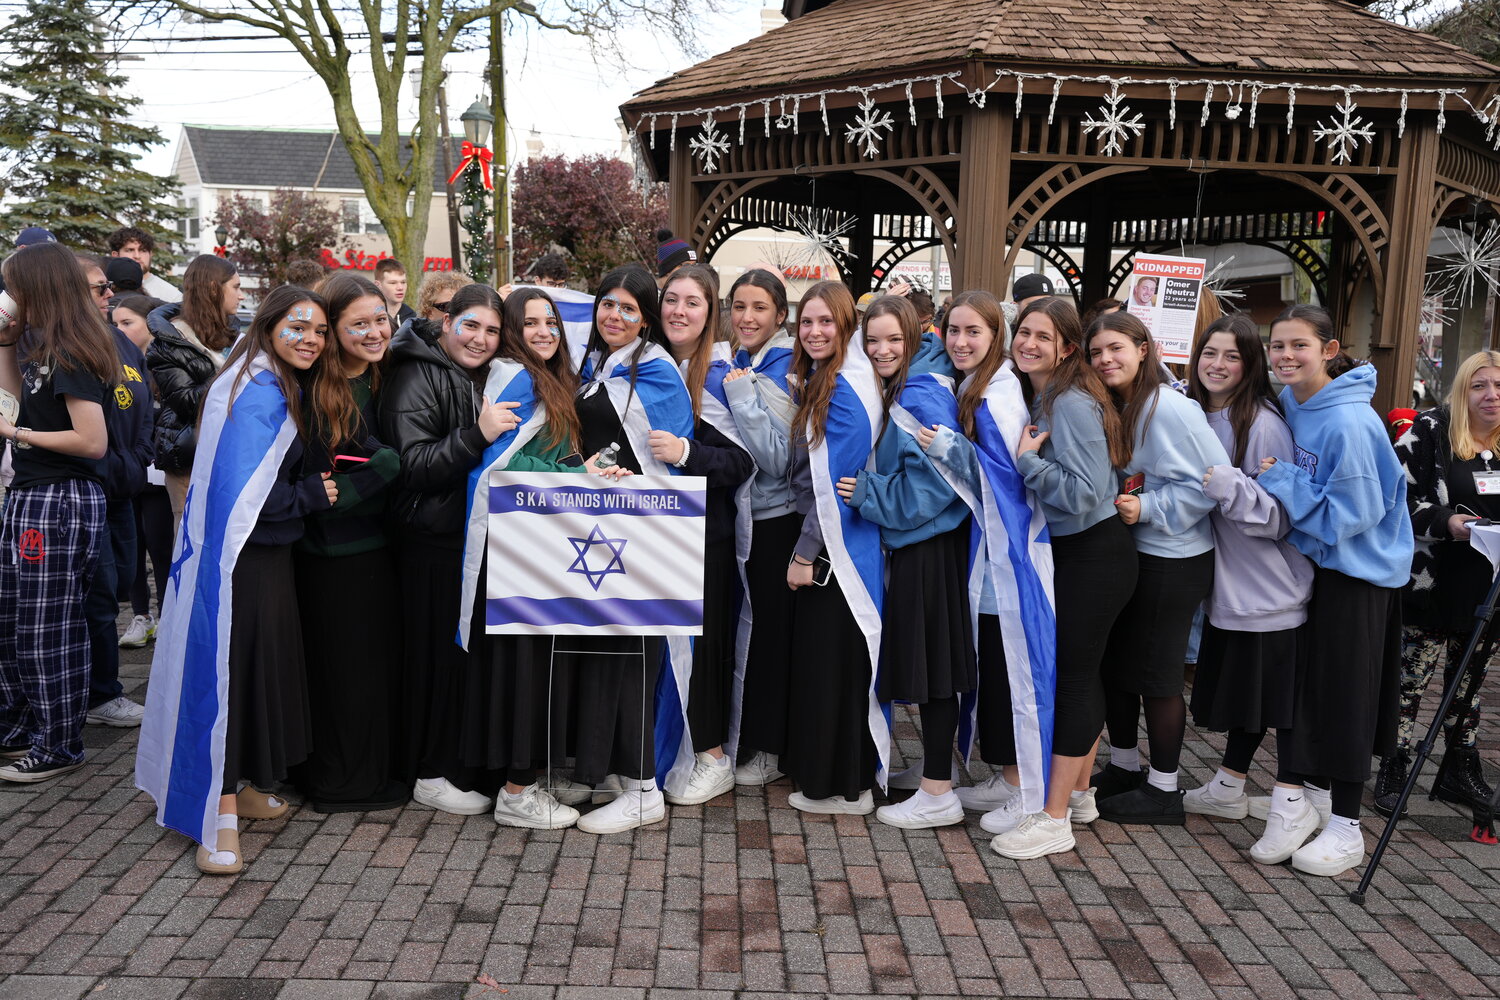 Students from the Stella K. Abraham High School for Girls, a modern Orthodox Jewish day school in Hewlett, proudly represented their institution in the crowd at a community rally in support of Israel last week.